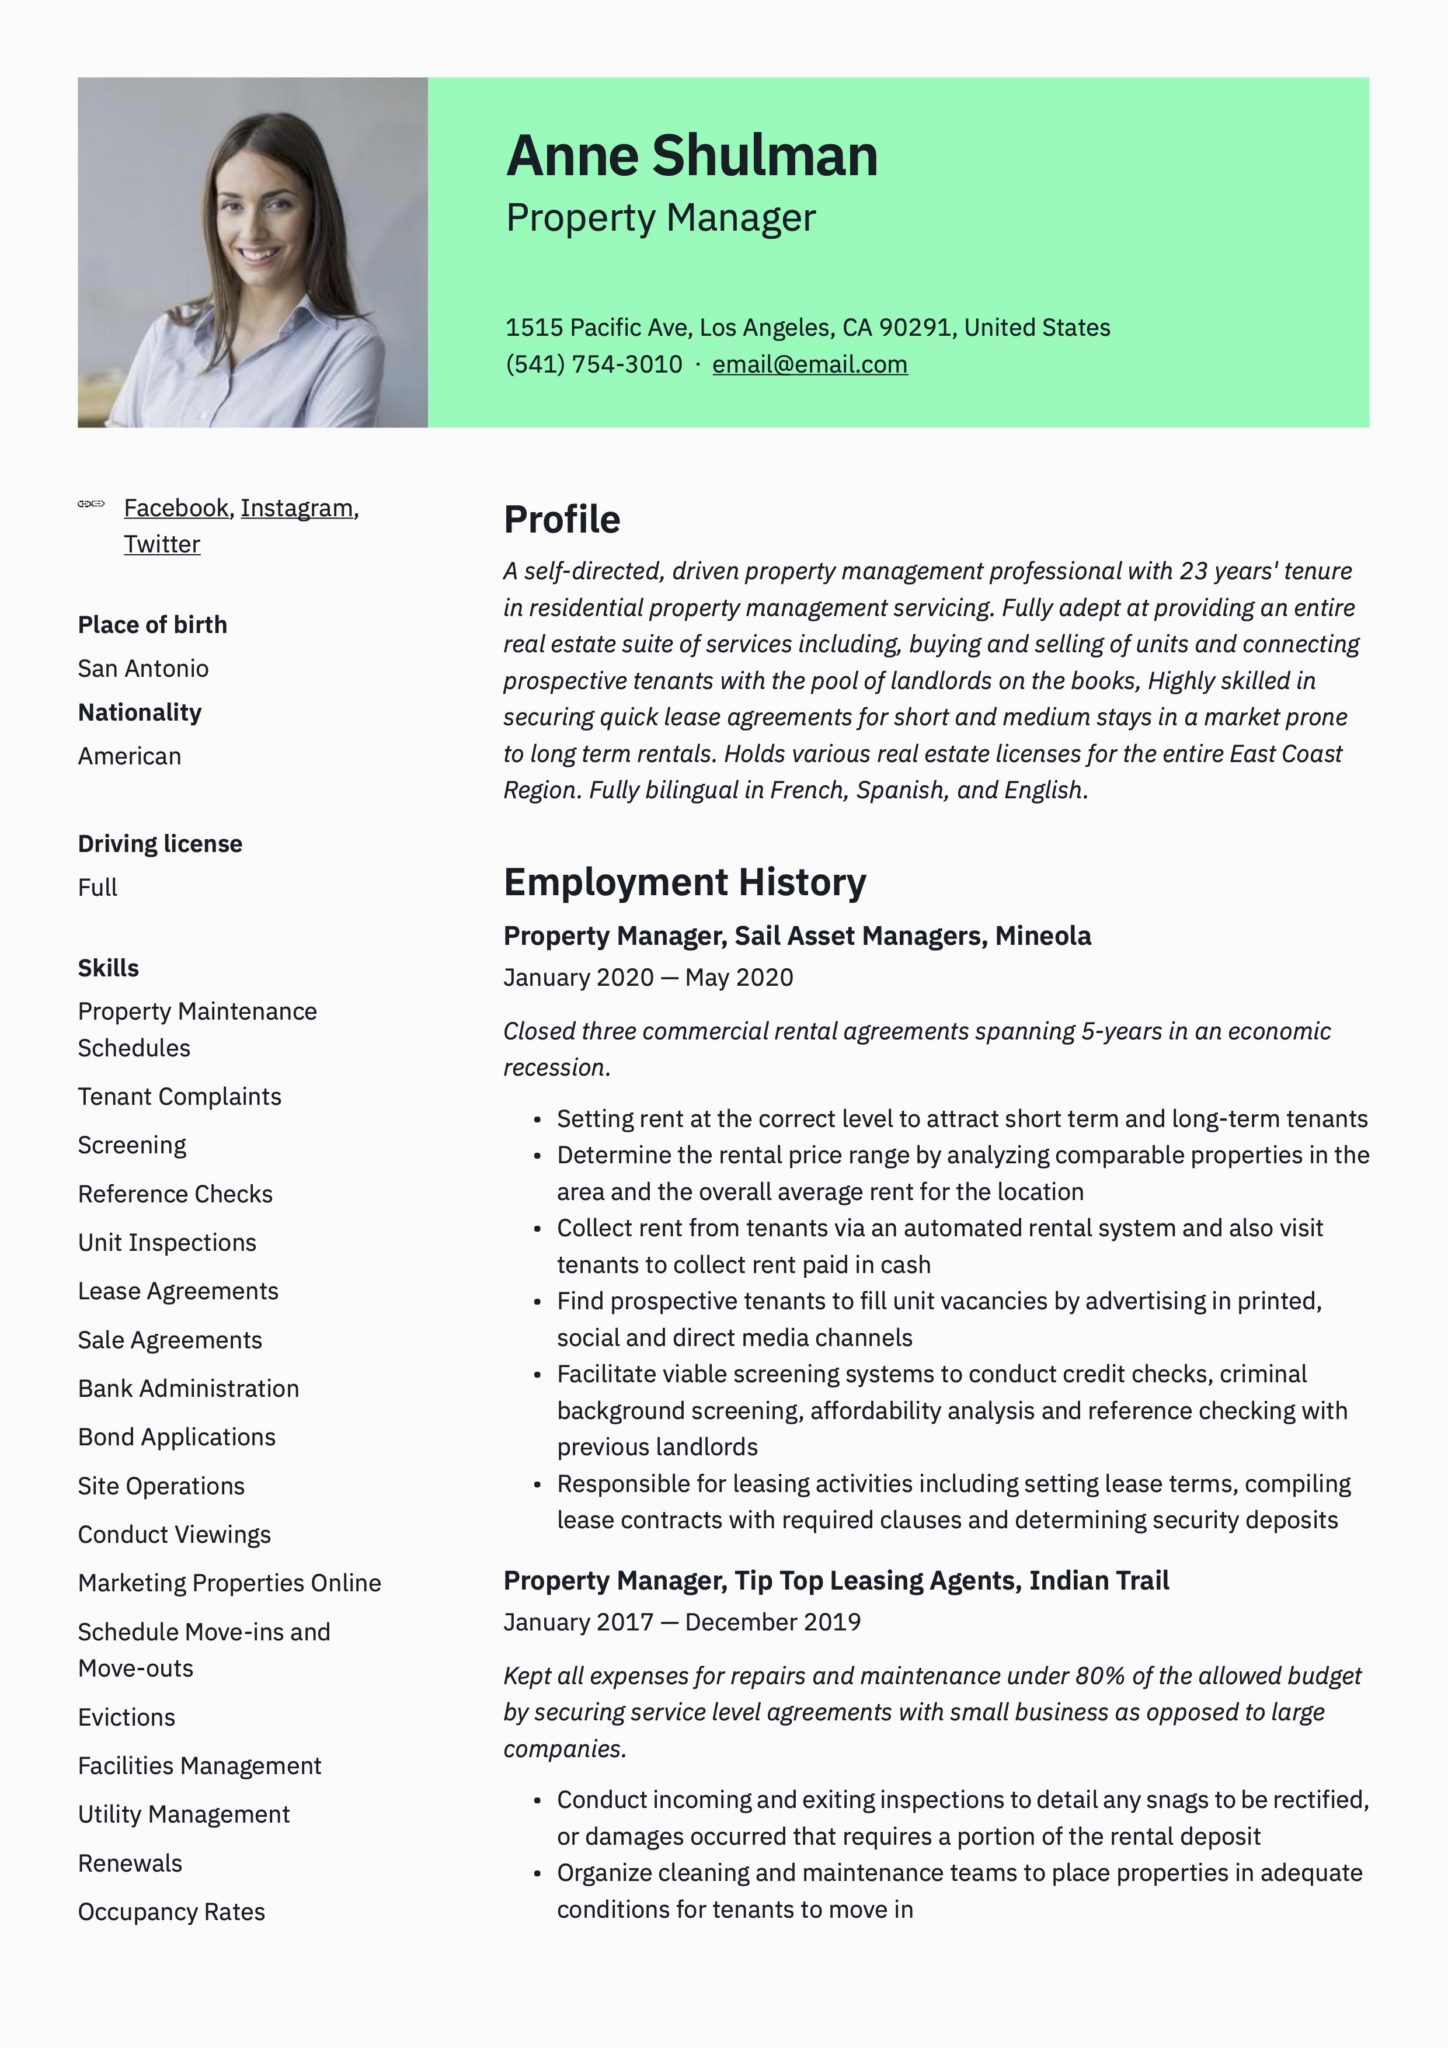 Sample Resume Objective for Property Manager Property Manager Resume & Writing Guide 18 Templates